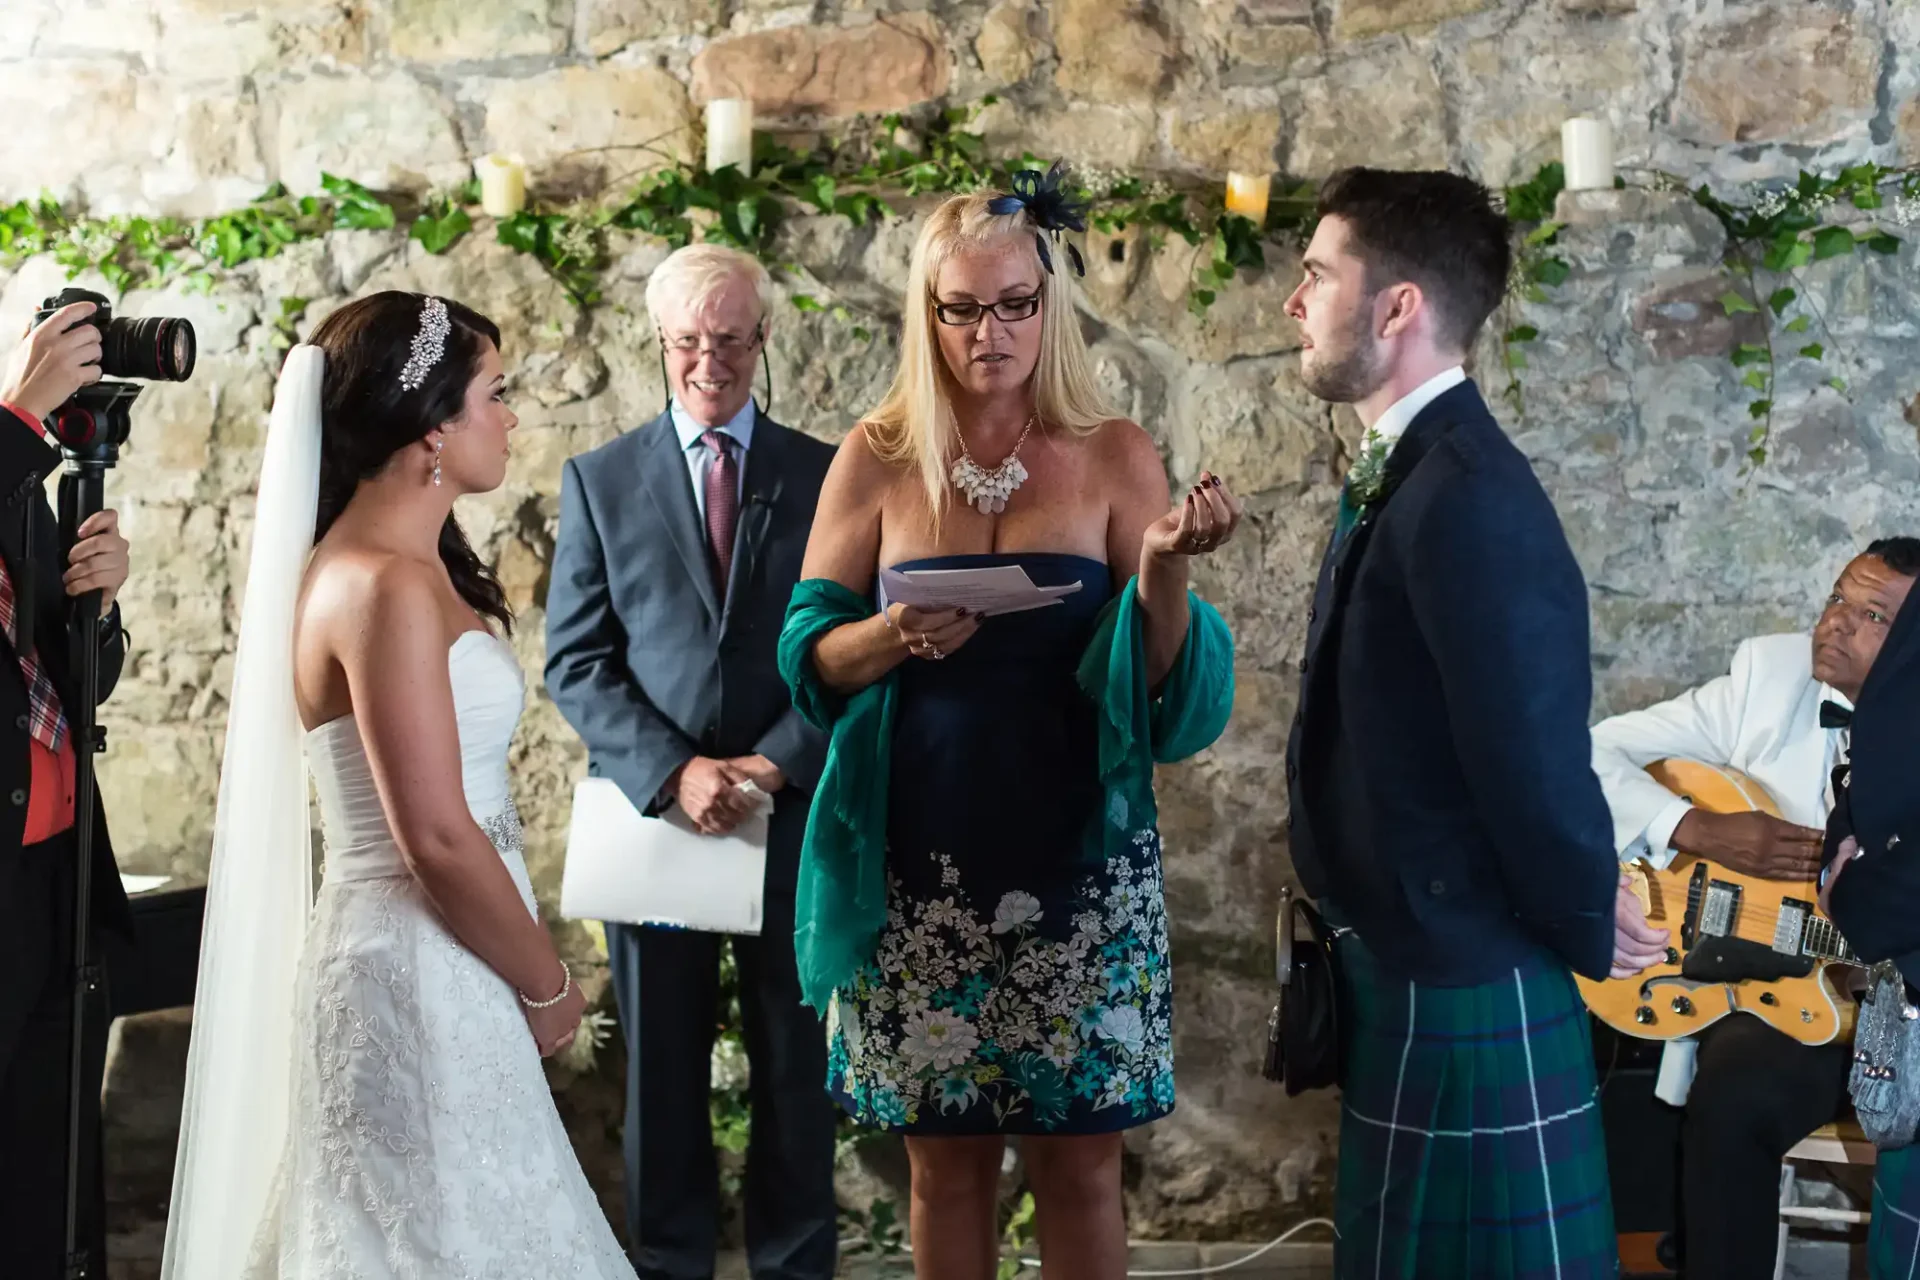 A bride and groom listen to a woman reading from a paper during a wedding ceremony, with an officiant and photographer nearby, in a rustic stone venue.